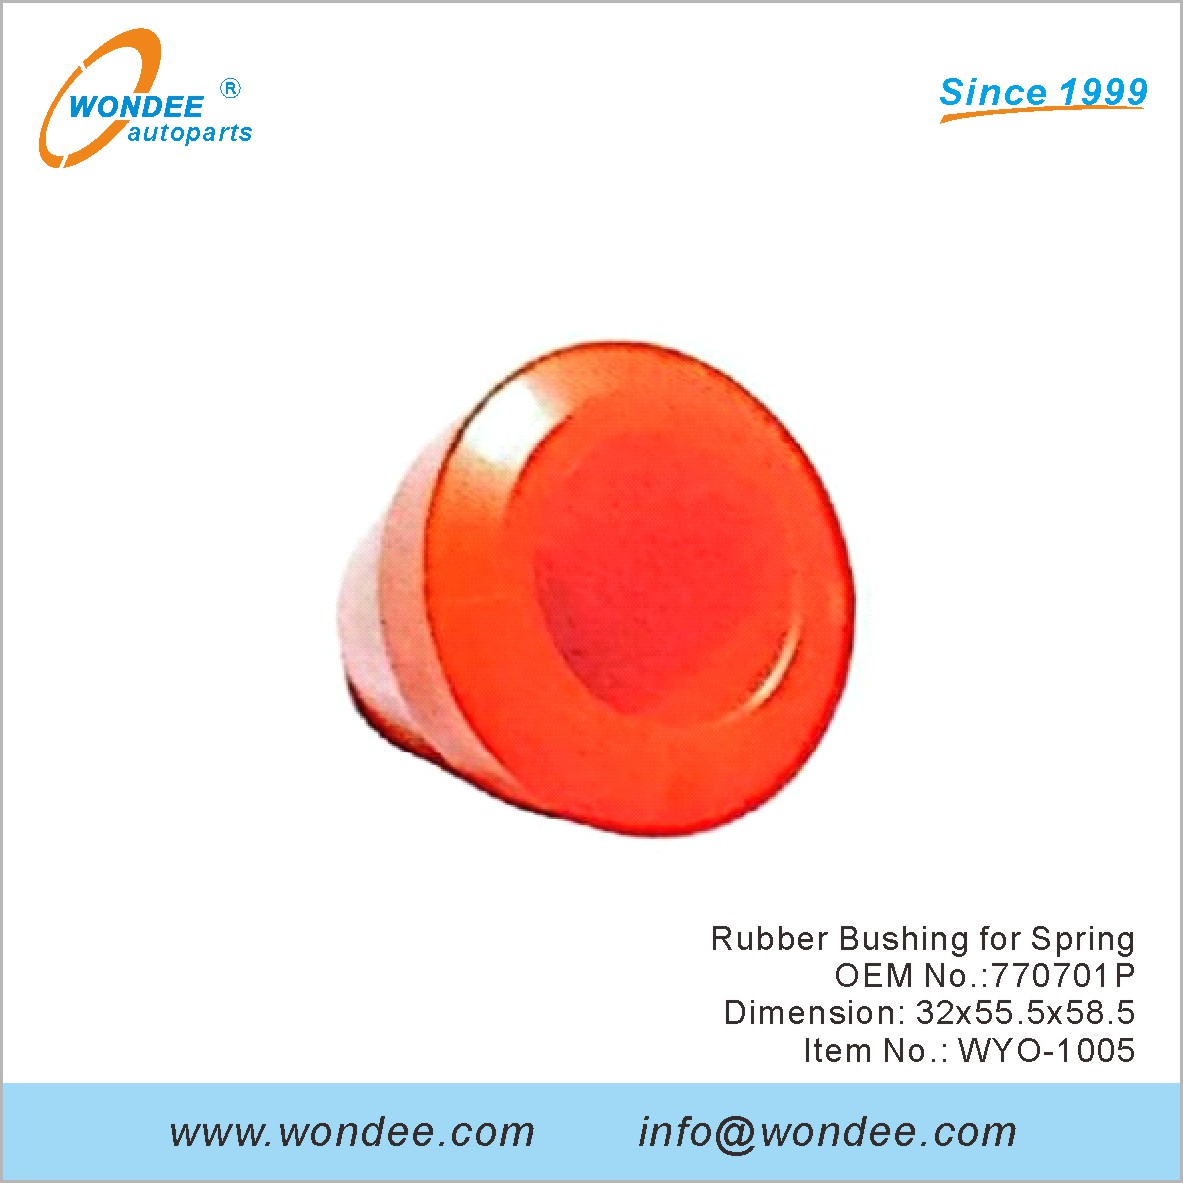 Rubber Bushing for Spring OEM 770701P for Volvo from WONDEE